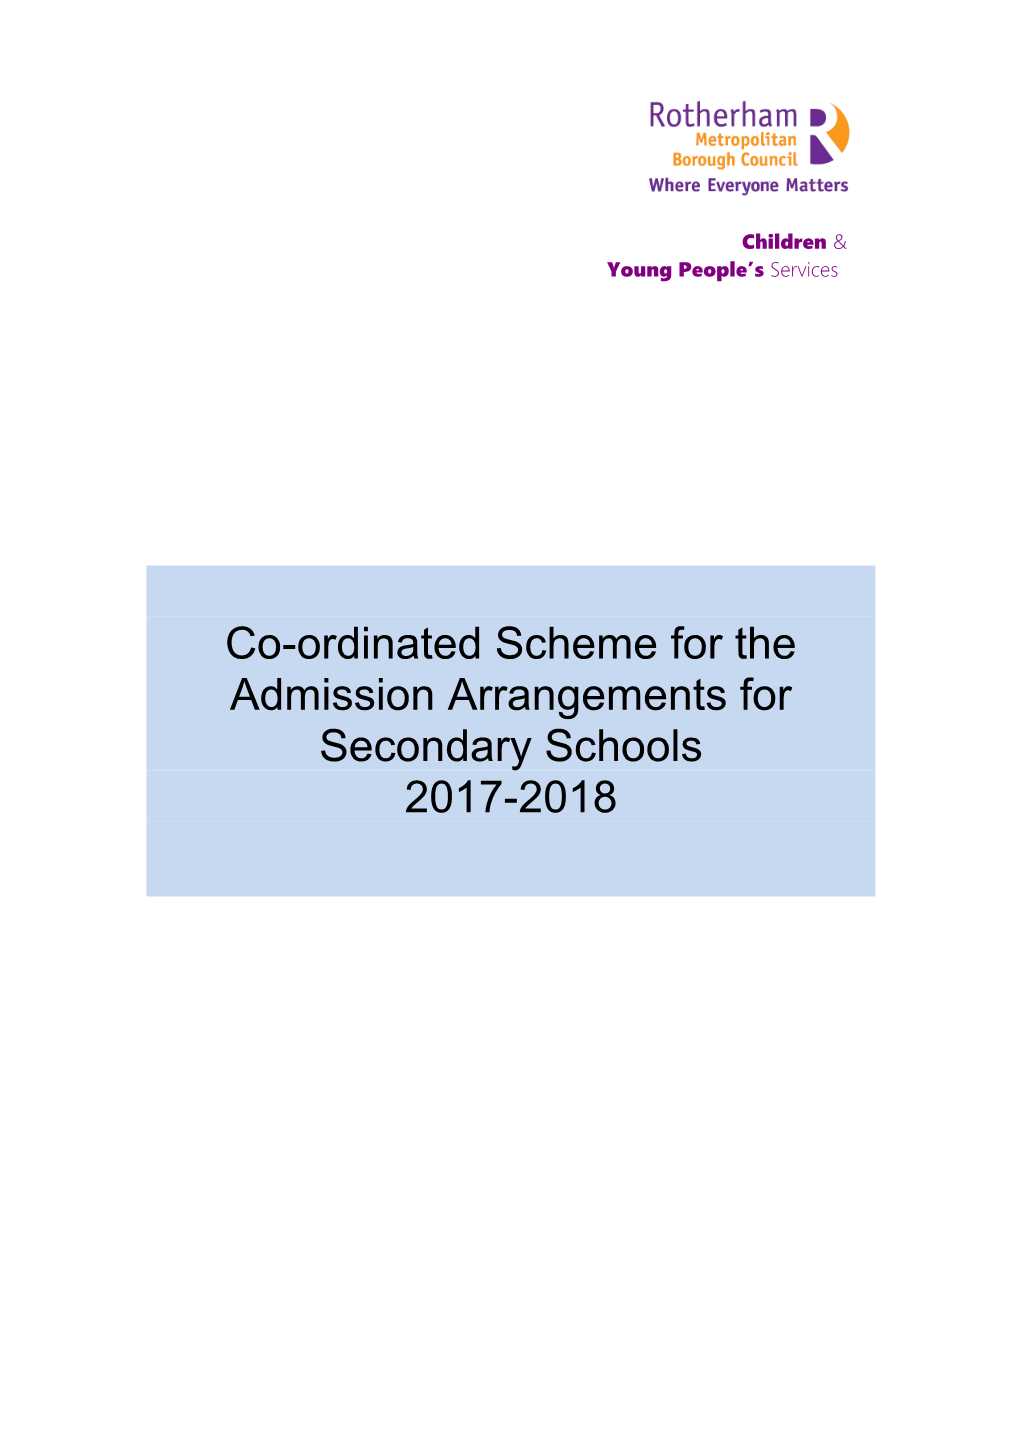 Co-Ordinated Scheme for the Admission Arrangements for Secondary Schools